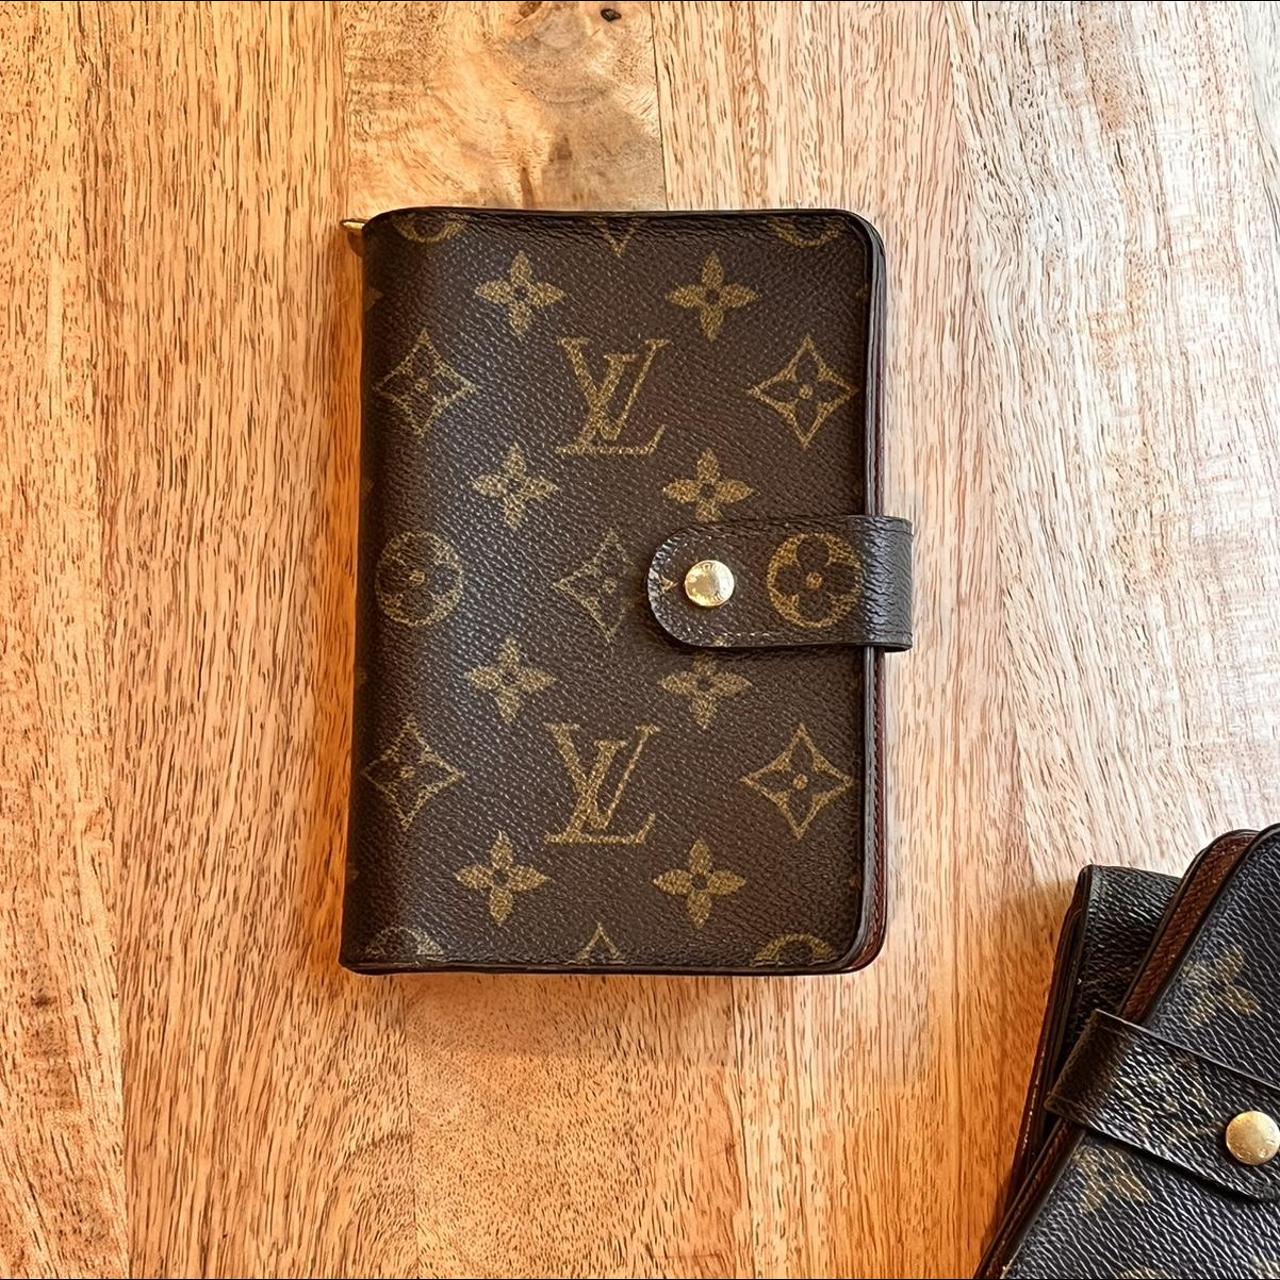 Authentic LV Wallet Purse in Black Brand New never used - Depop